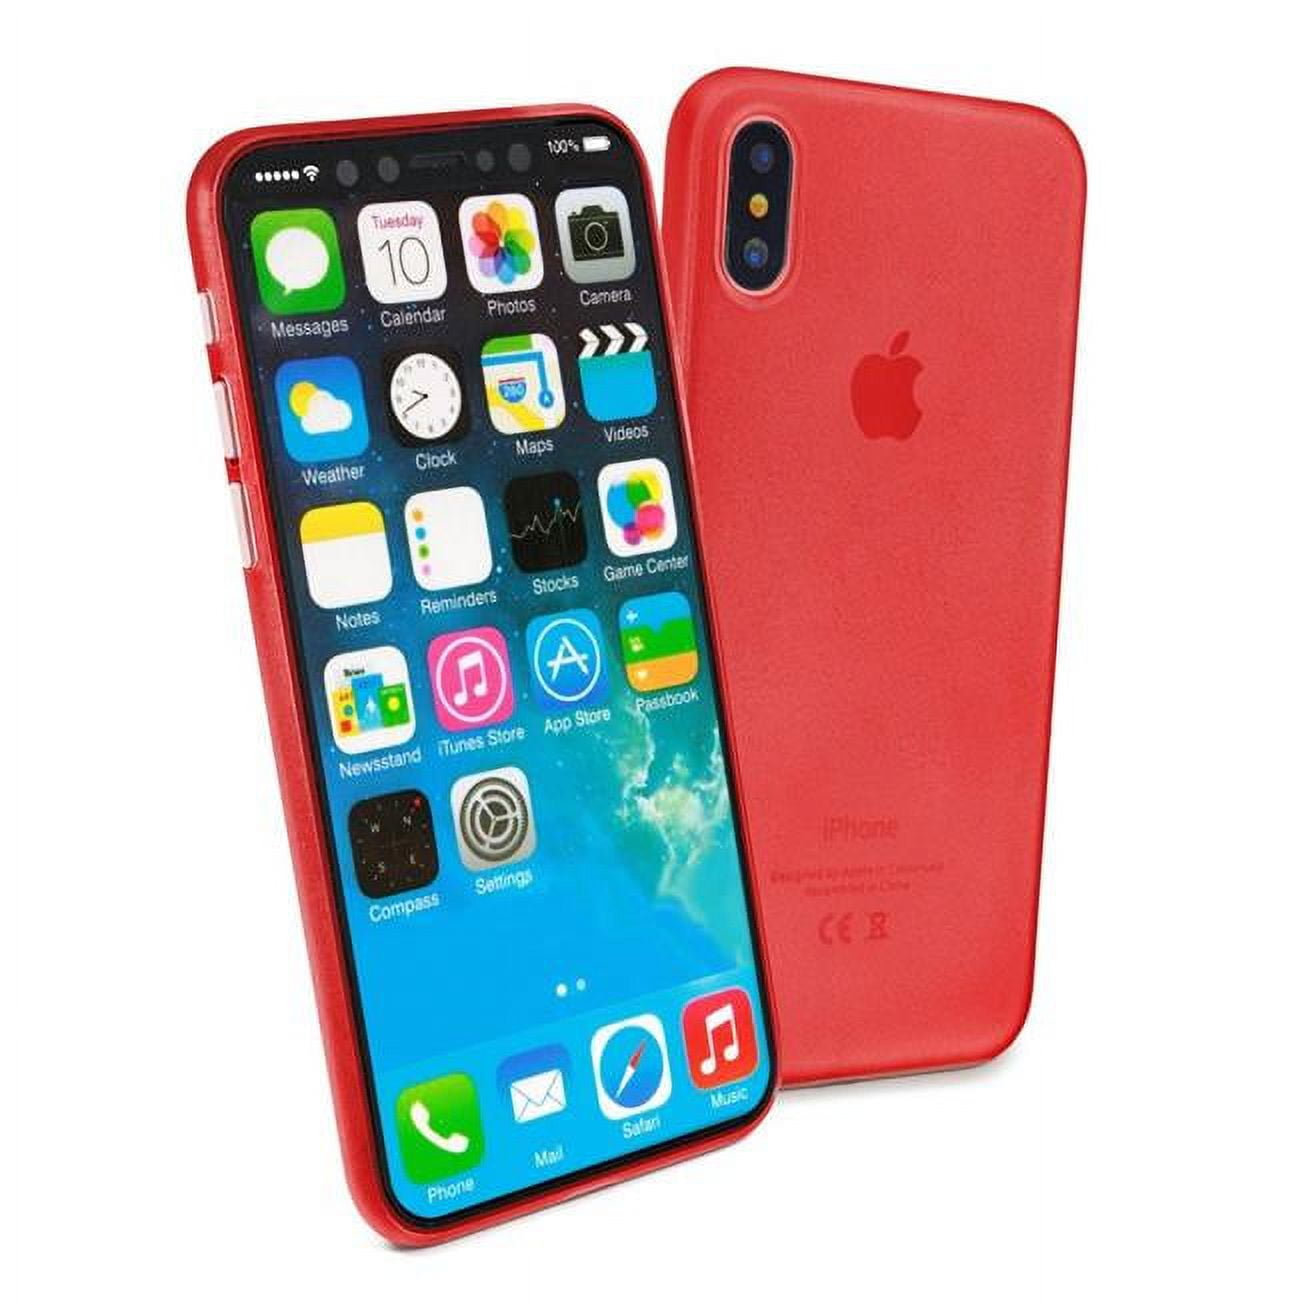 B10-97 Rigid Ultra-thin & Light Weight Skin Case Cover for Apple iPhone X, Red -  Tuff-luv, B10_97